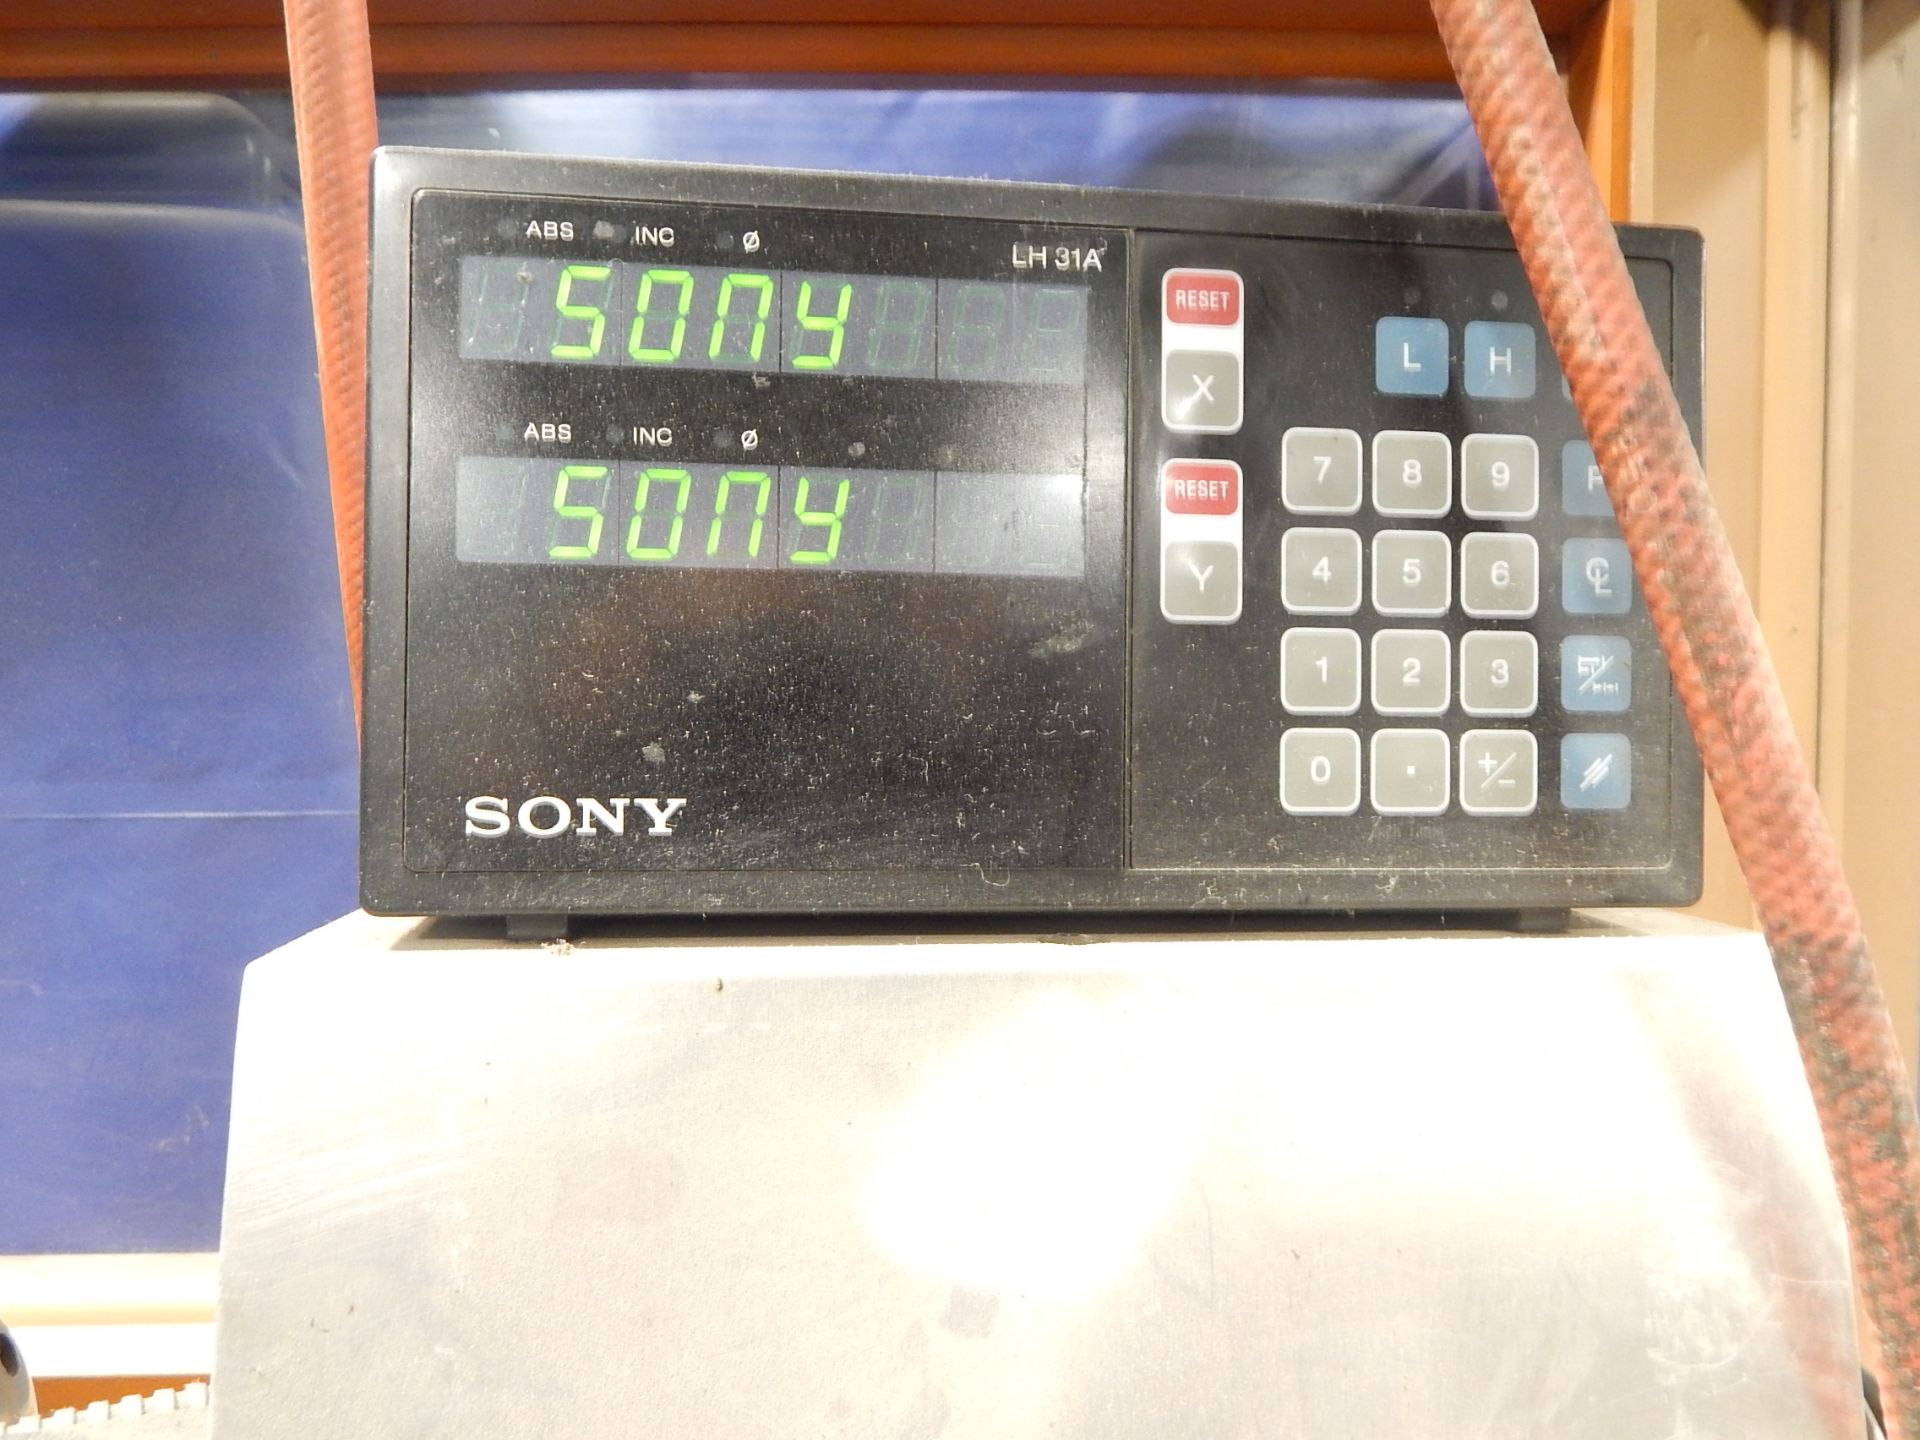 Moore Jig Grinder No. 2, SN 7561, Sony LH31A DRO, Table Size, 10" x 19", Moore Grinding Spindle - Image 3 of 7